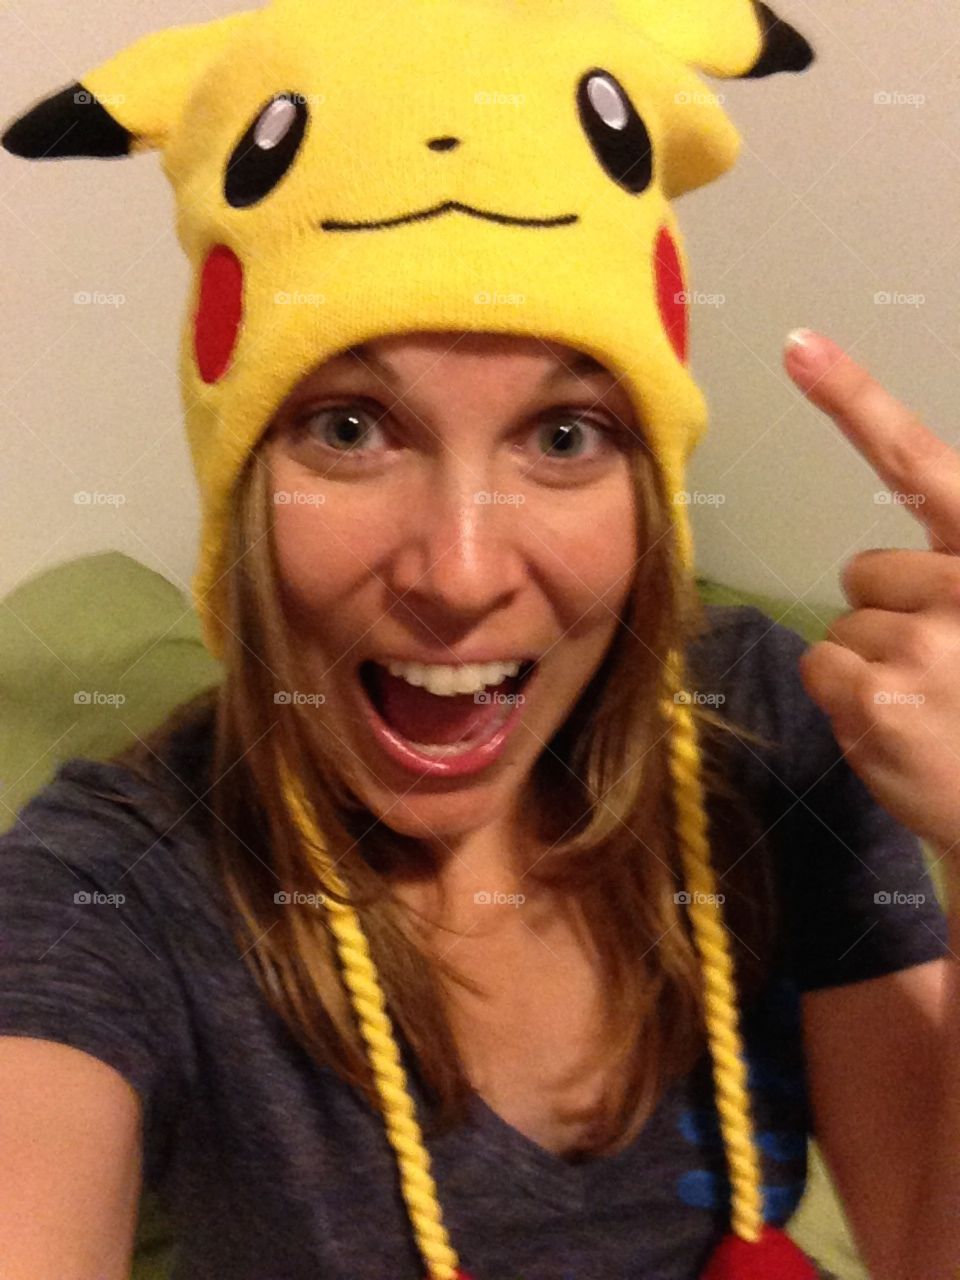 Check out my pikachu hat!